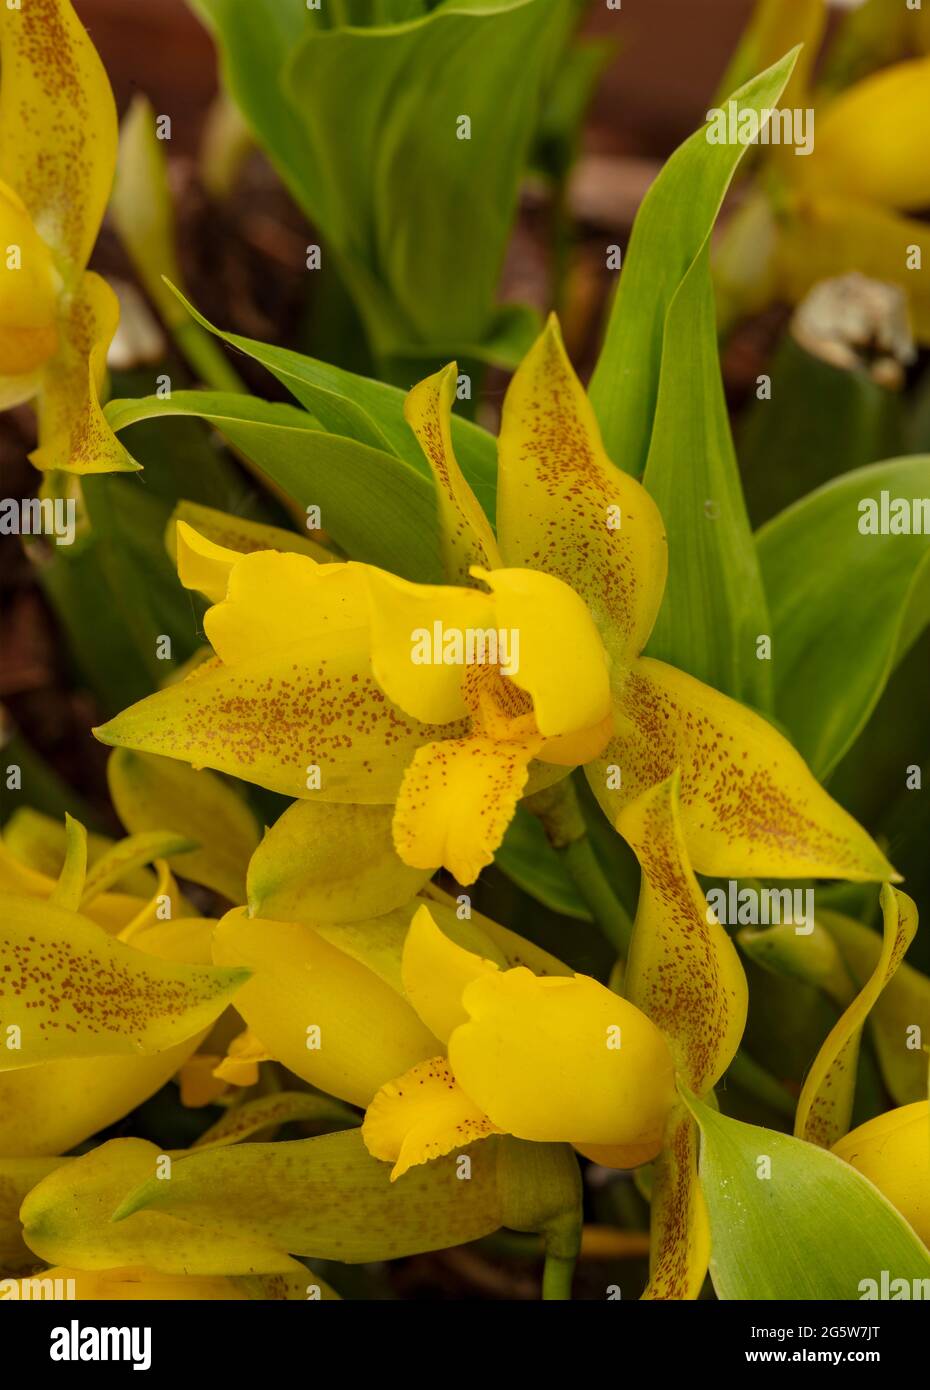 Lycaste Chiltern Hundreds, beautiful yellow orchid flower portrait Stock Photo